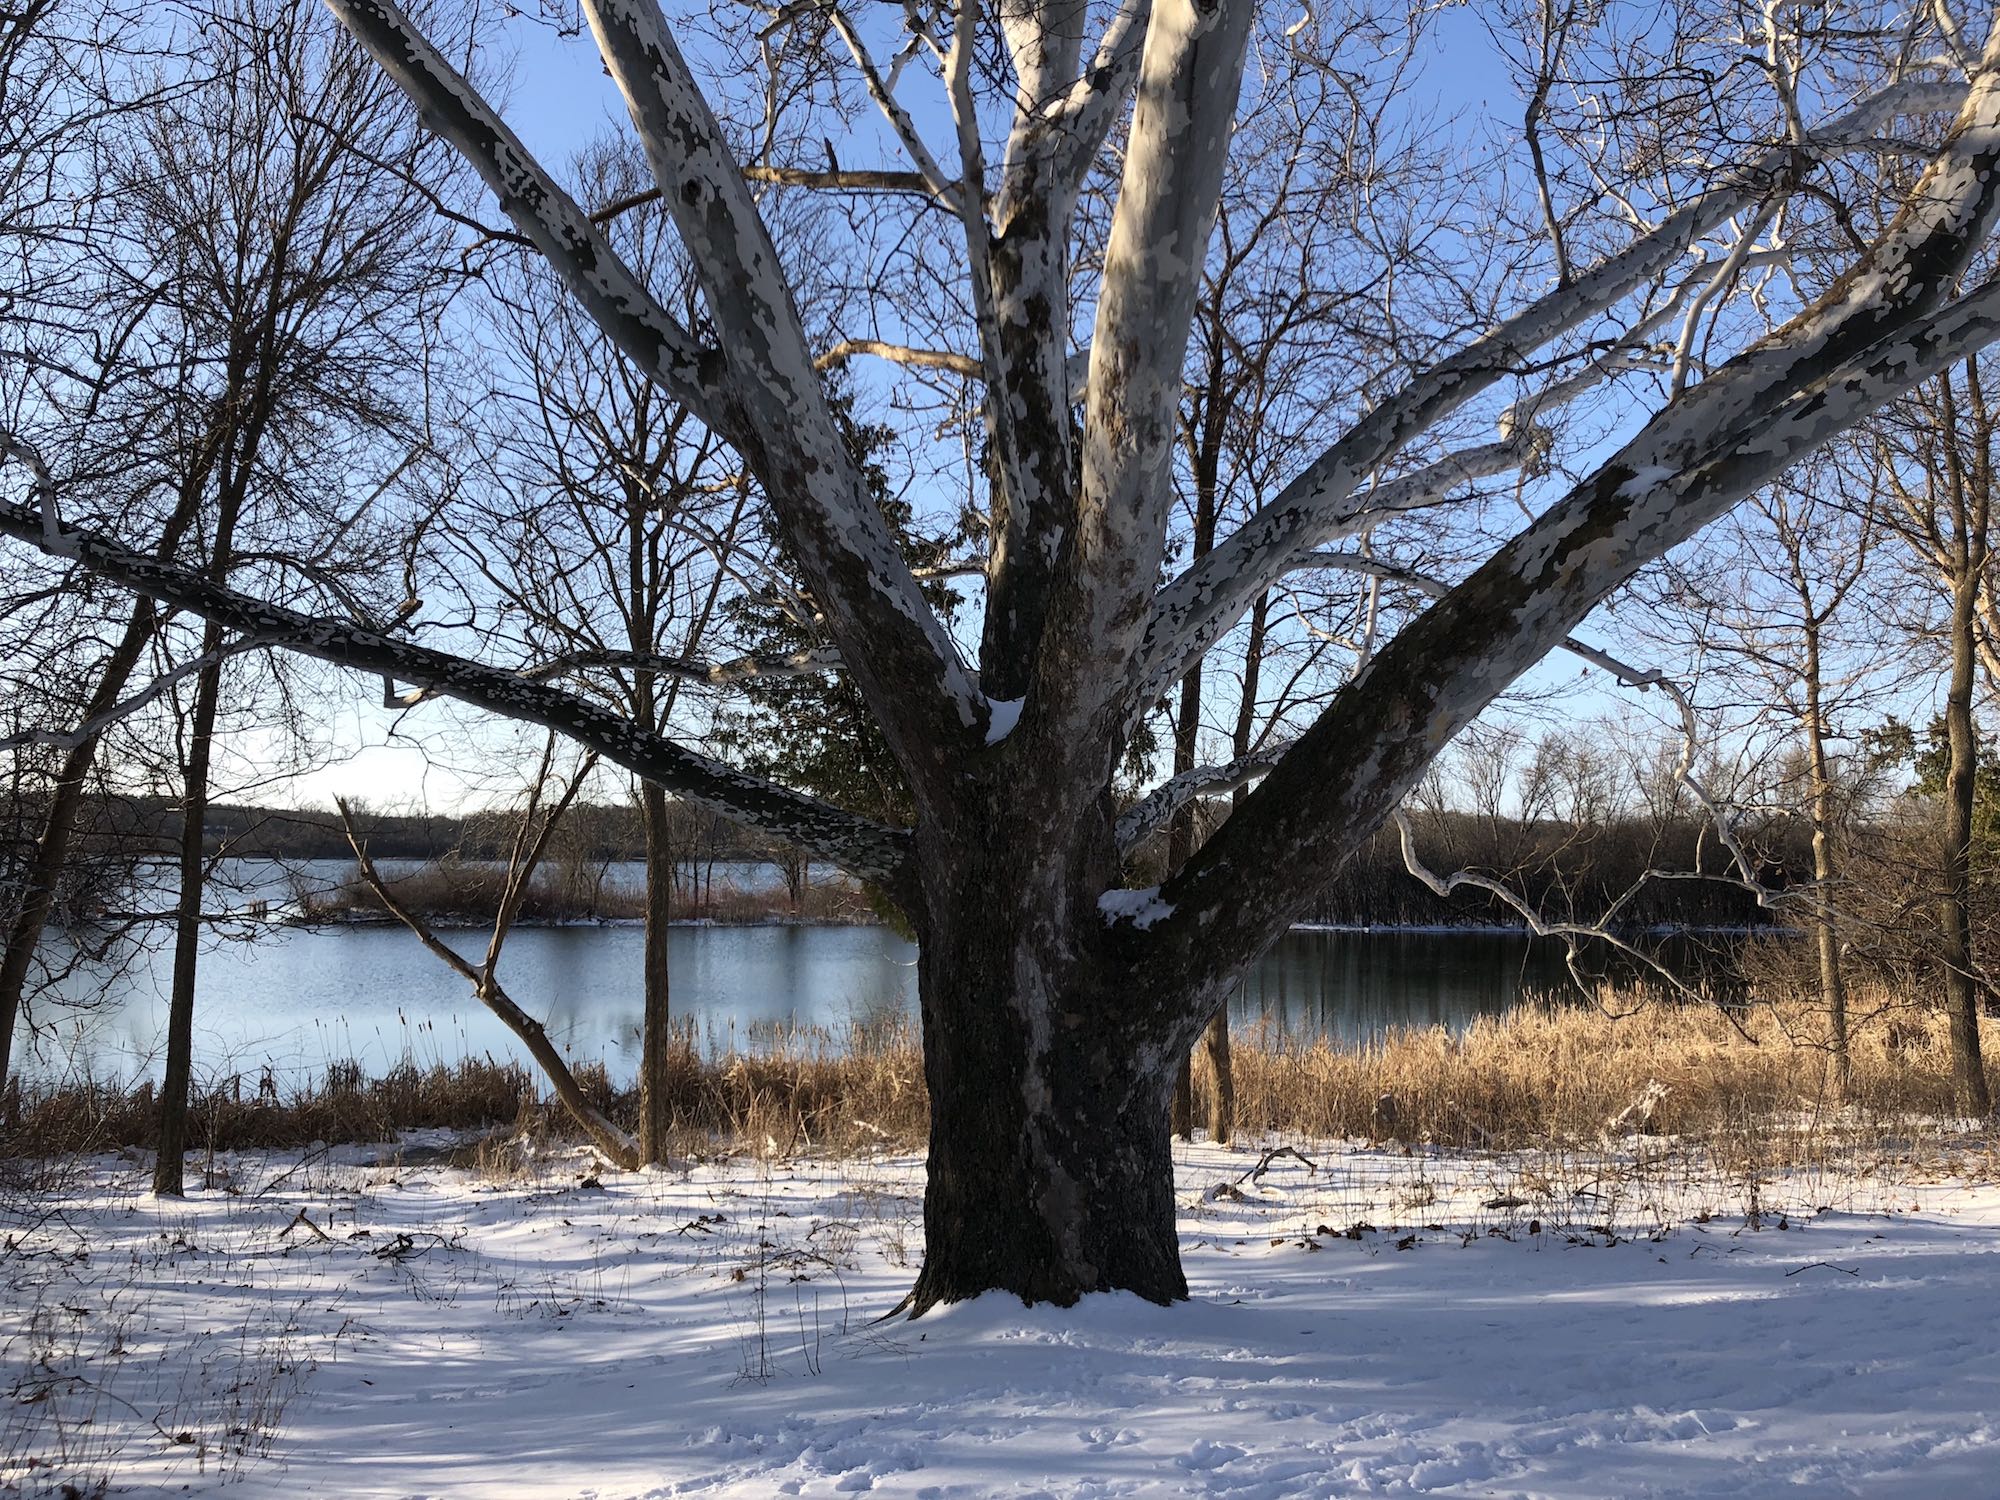 Sycamore tree between Ho-Nee-Um Pond and Arbor Drive on north shore of Lake Wingra on April 17, 2018.